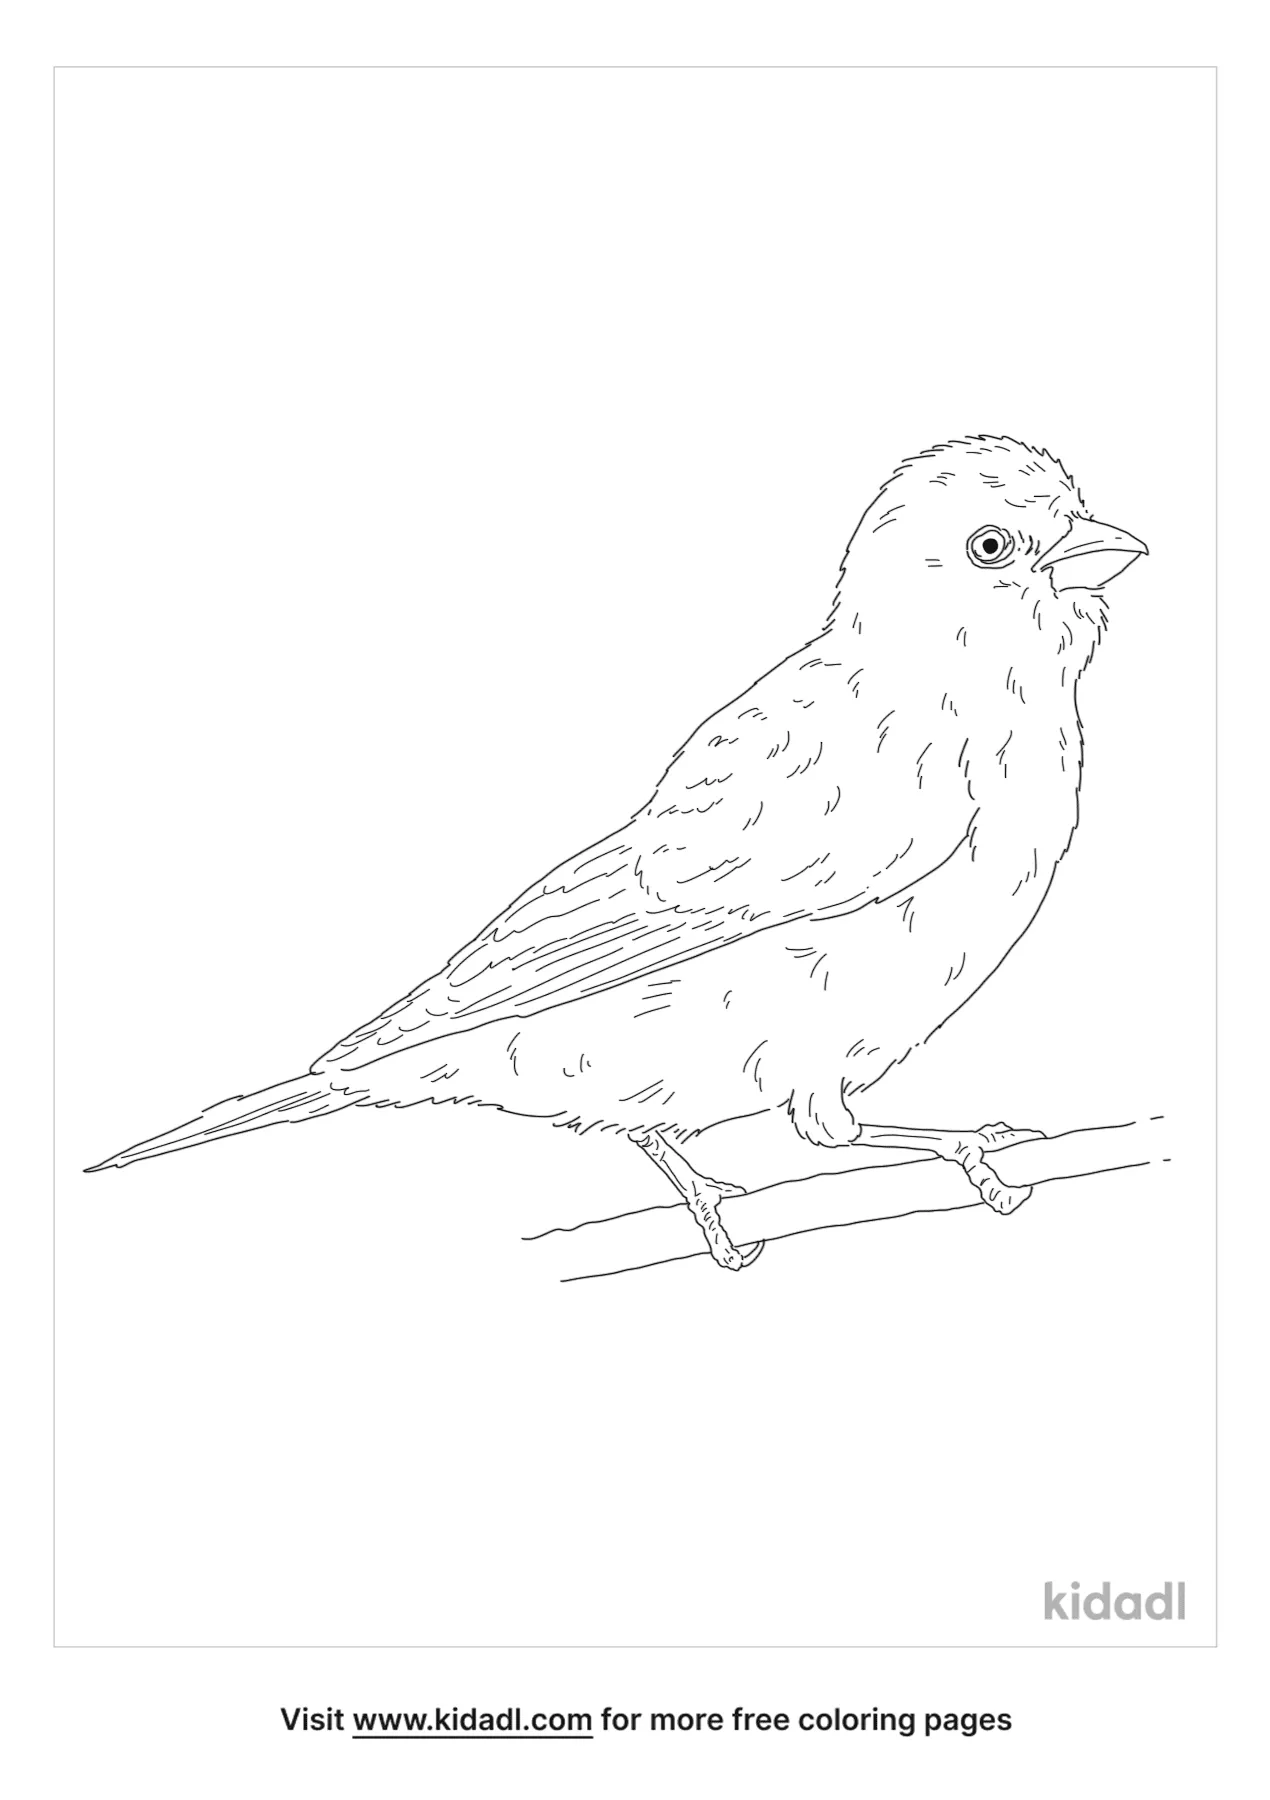 Kids Coloring Pages Free To Print Lovetoknow   Gambar